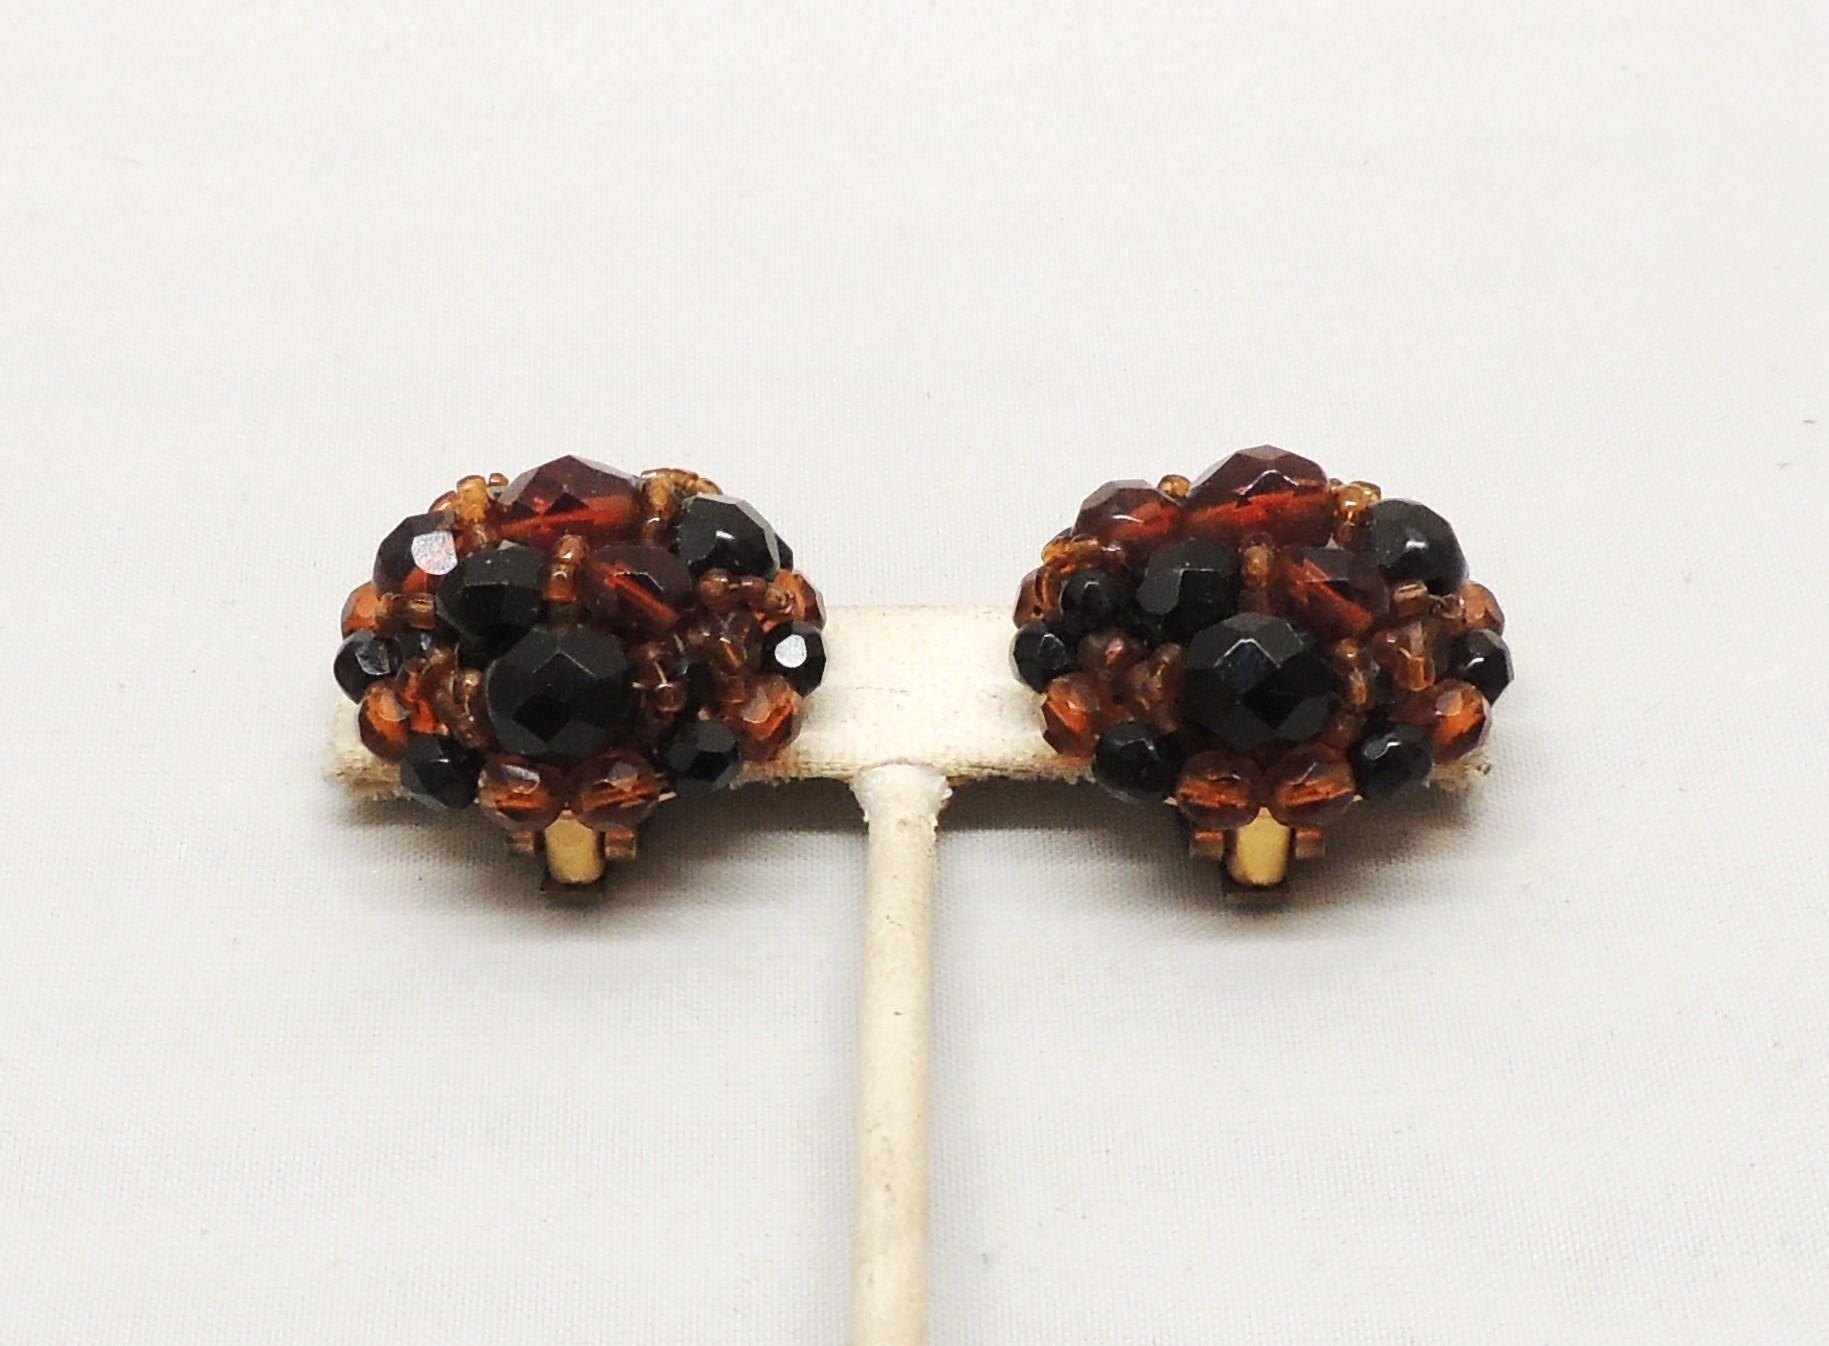 Vintage 1950s Signed Coppola e Toppo Italy Brown & Black Beaded Clip Earrings For Sale 1